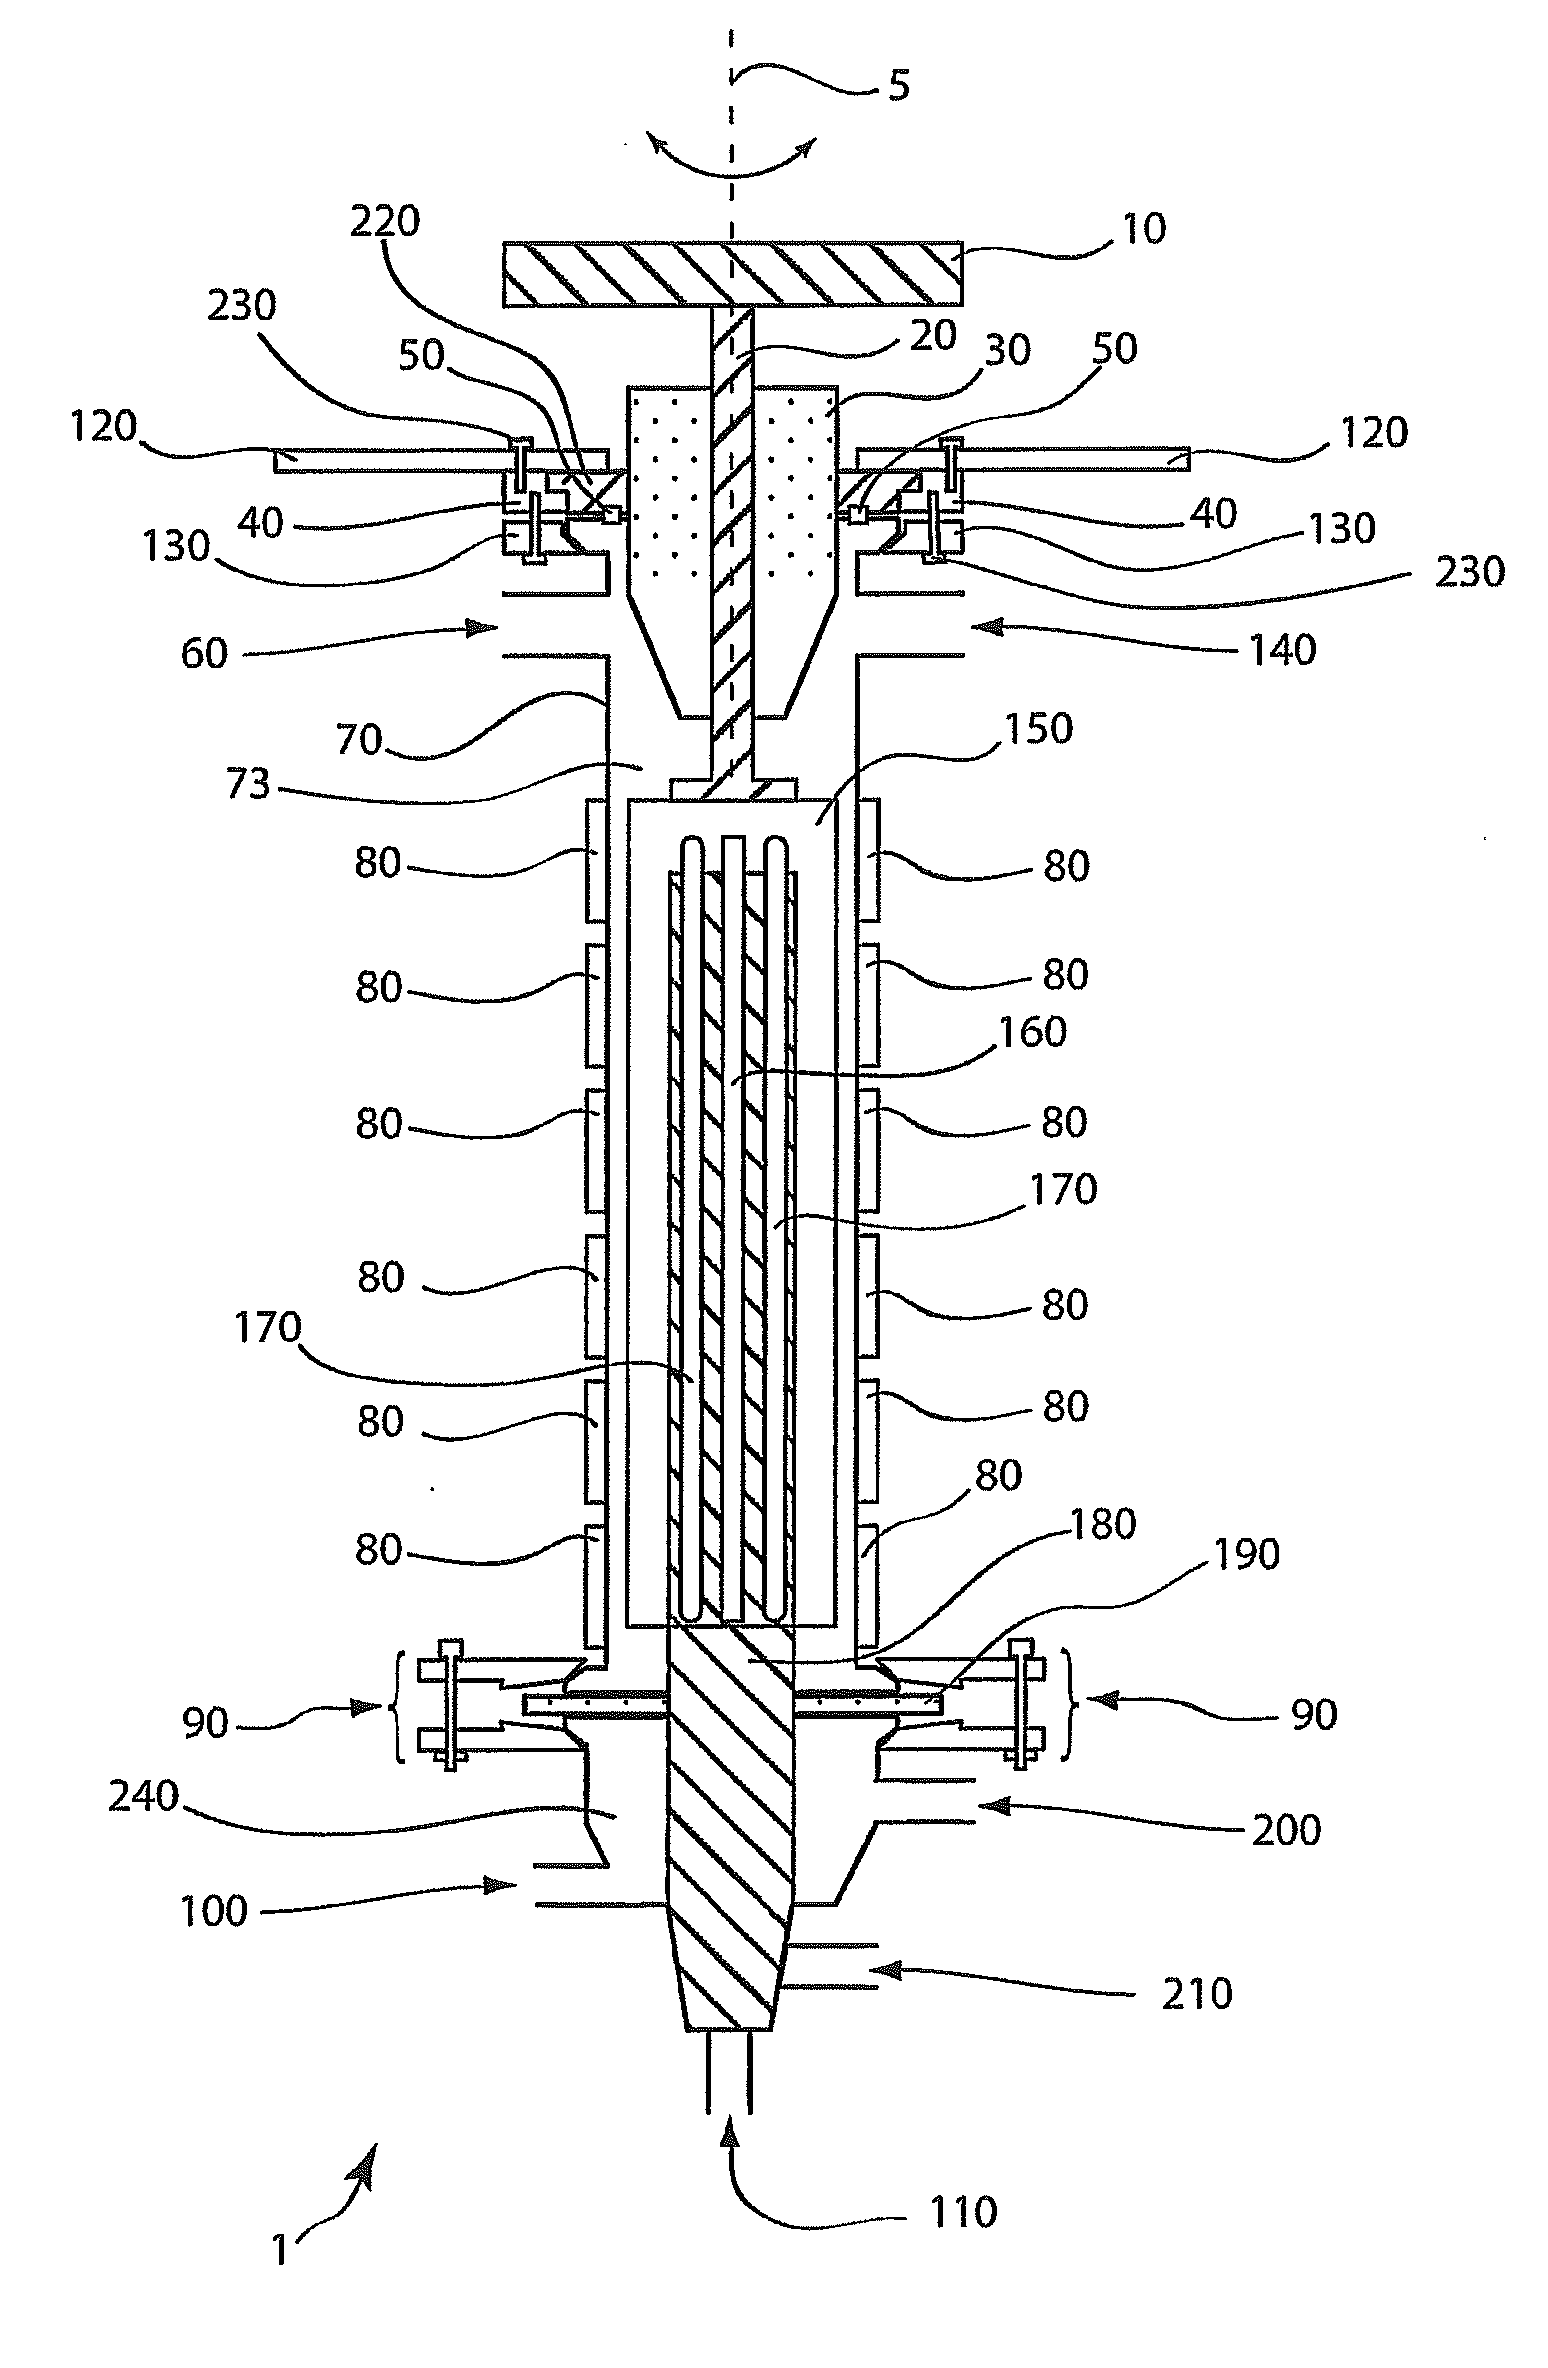 Metal alkoxides, apparatus for manufacturing metal alkoxides, related methods and uses thereof